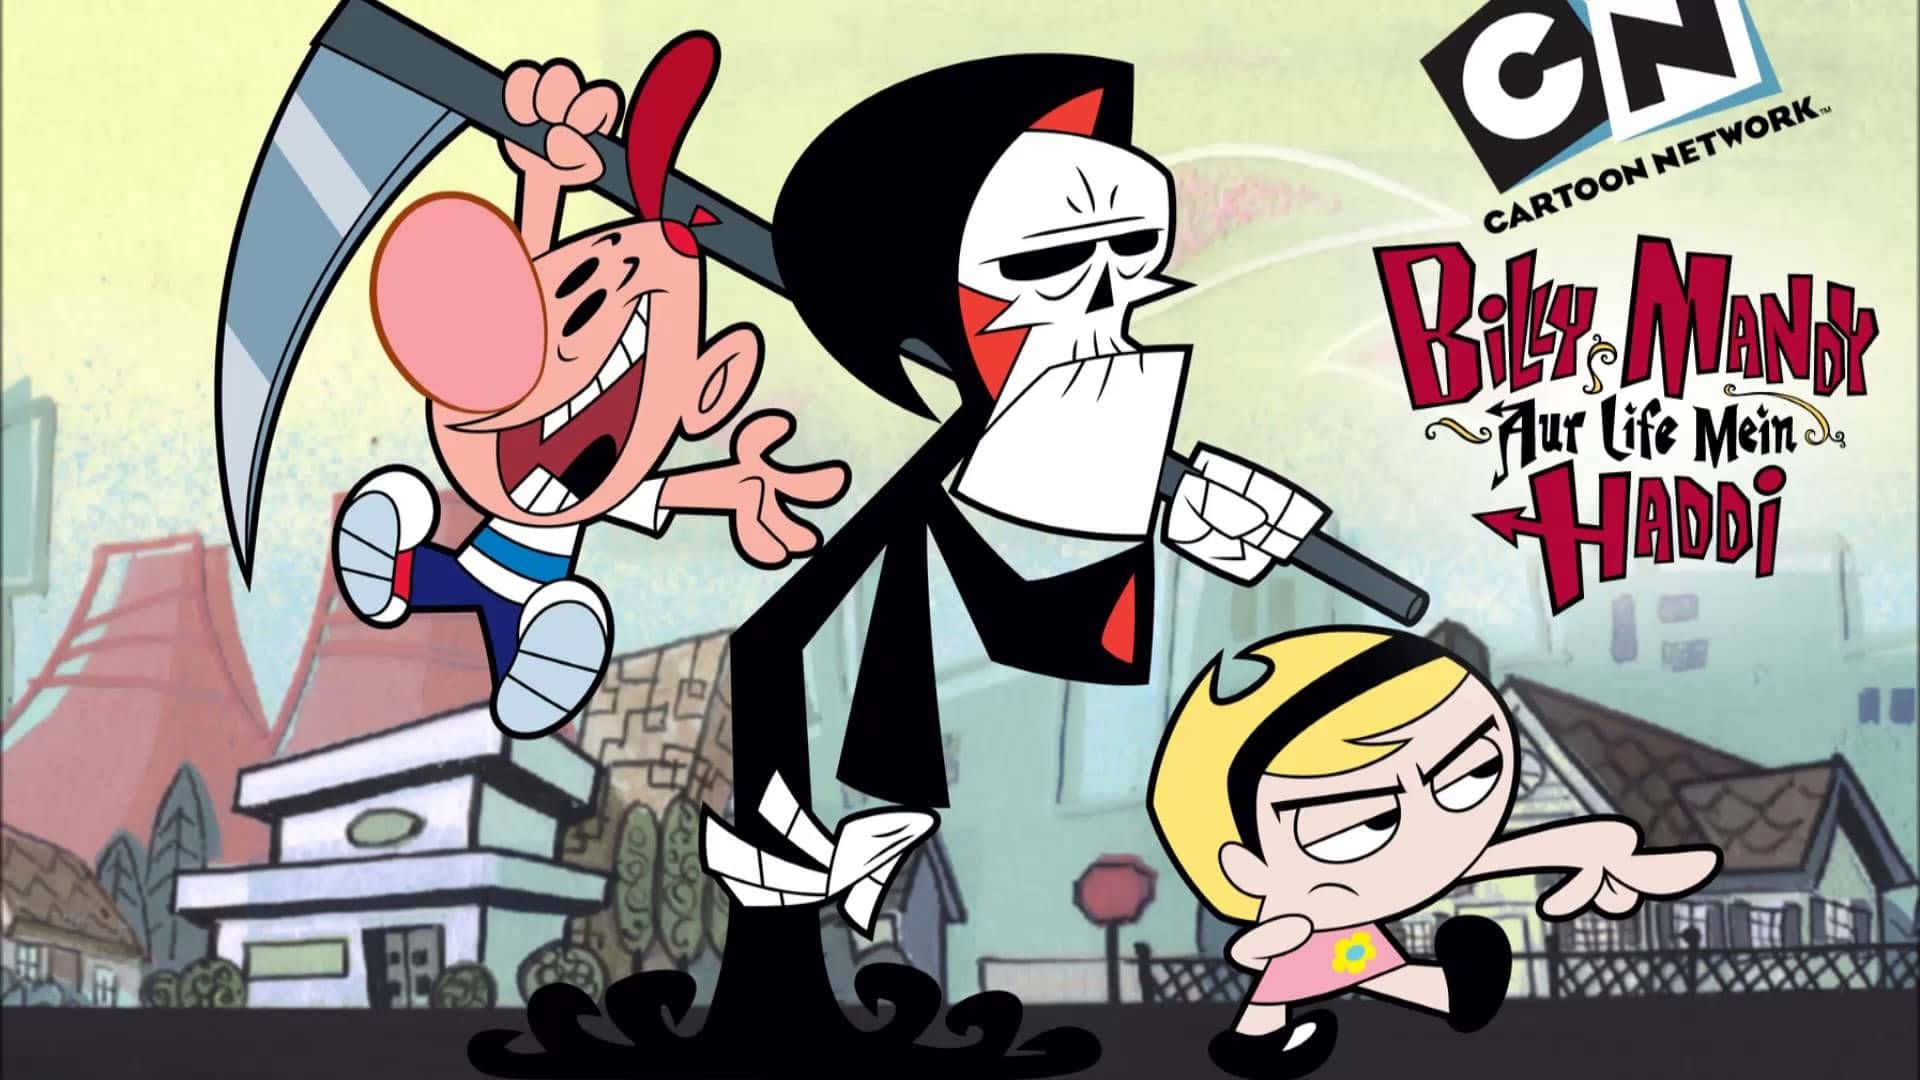 The Grim Adventures of Billy and Mandy Wallpaper featuring Billy, Mandy, and Grim Wallpaper